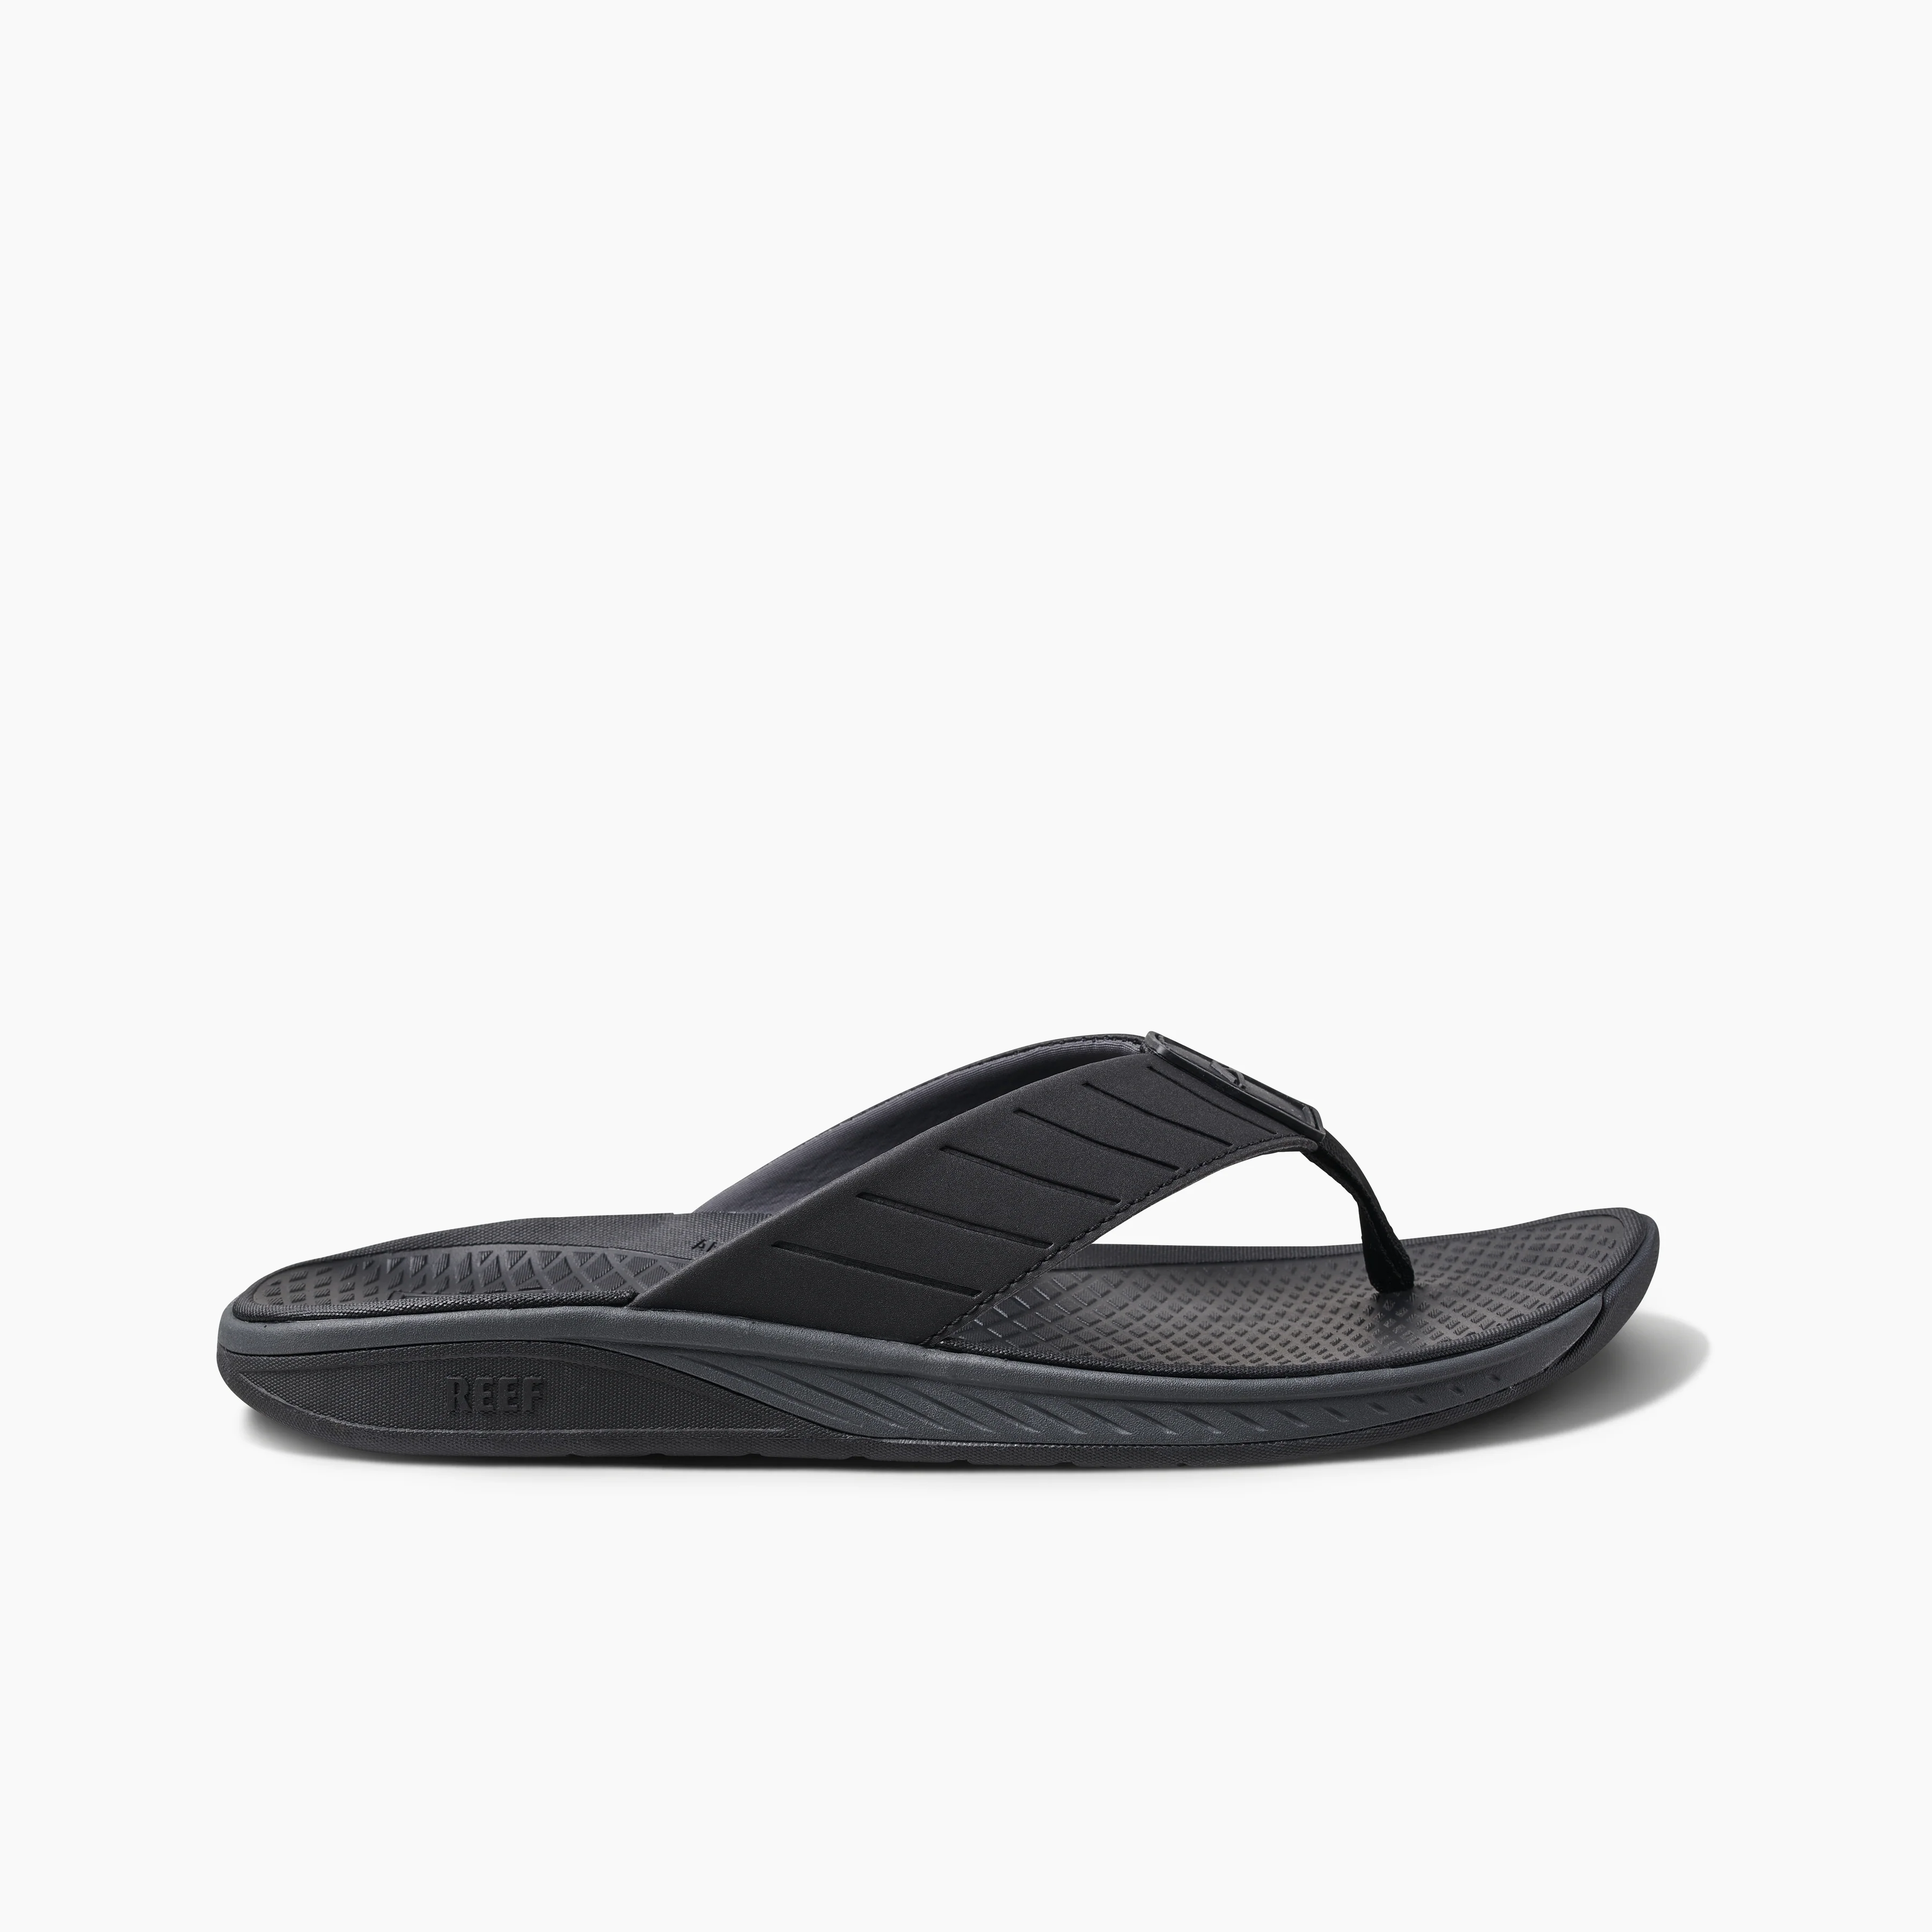 Men's Deckhand Water Friendly Sandals in Stormy Black side view